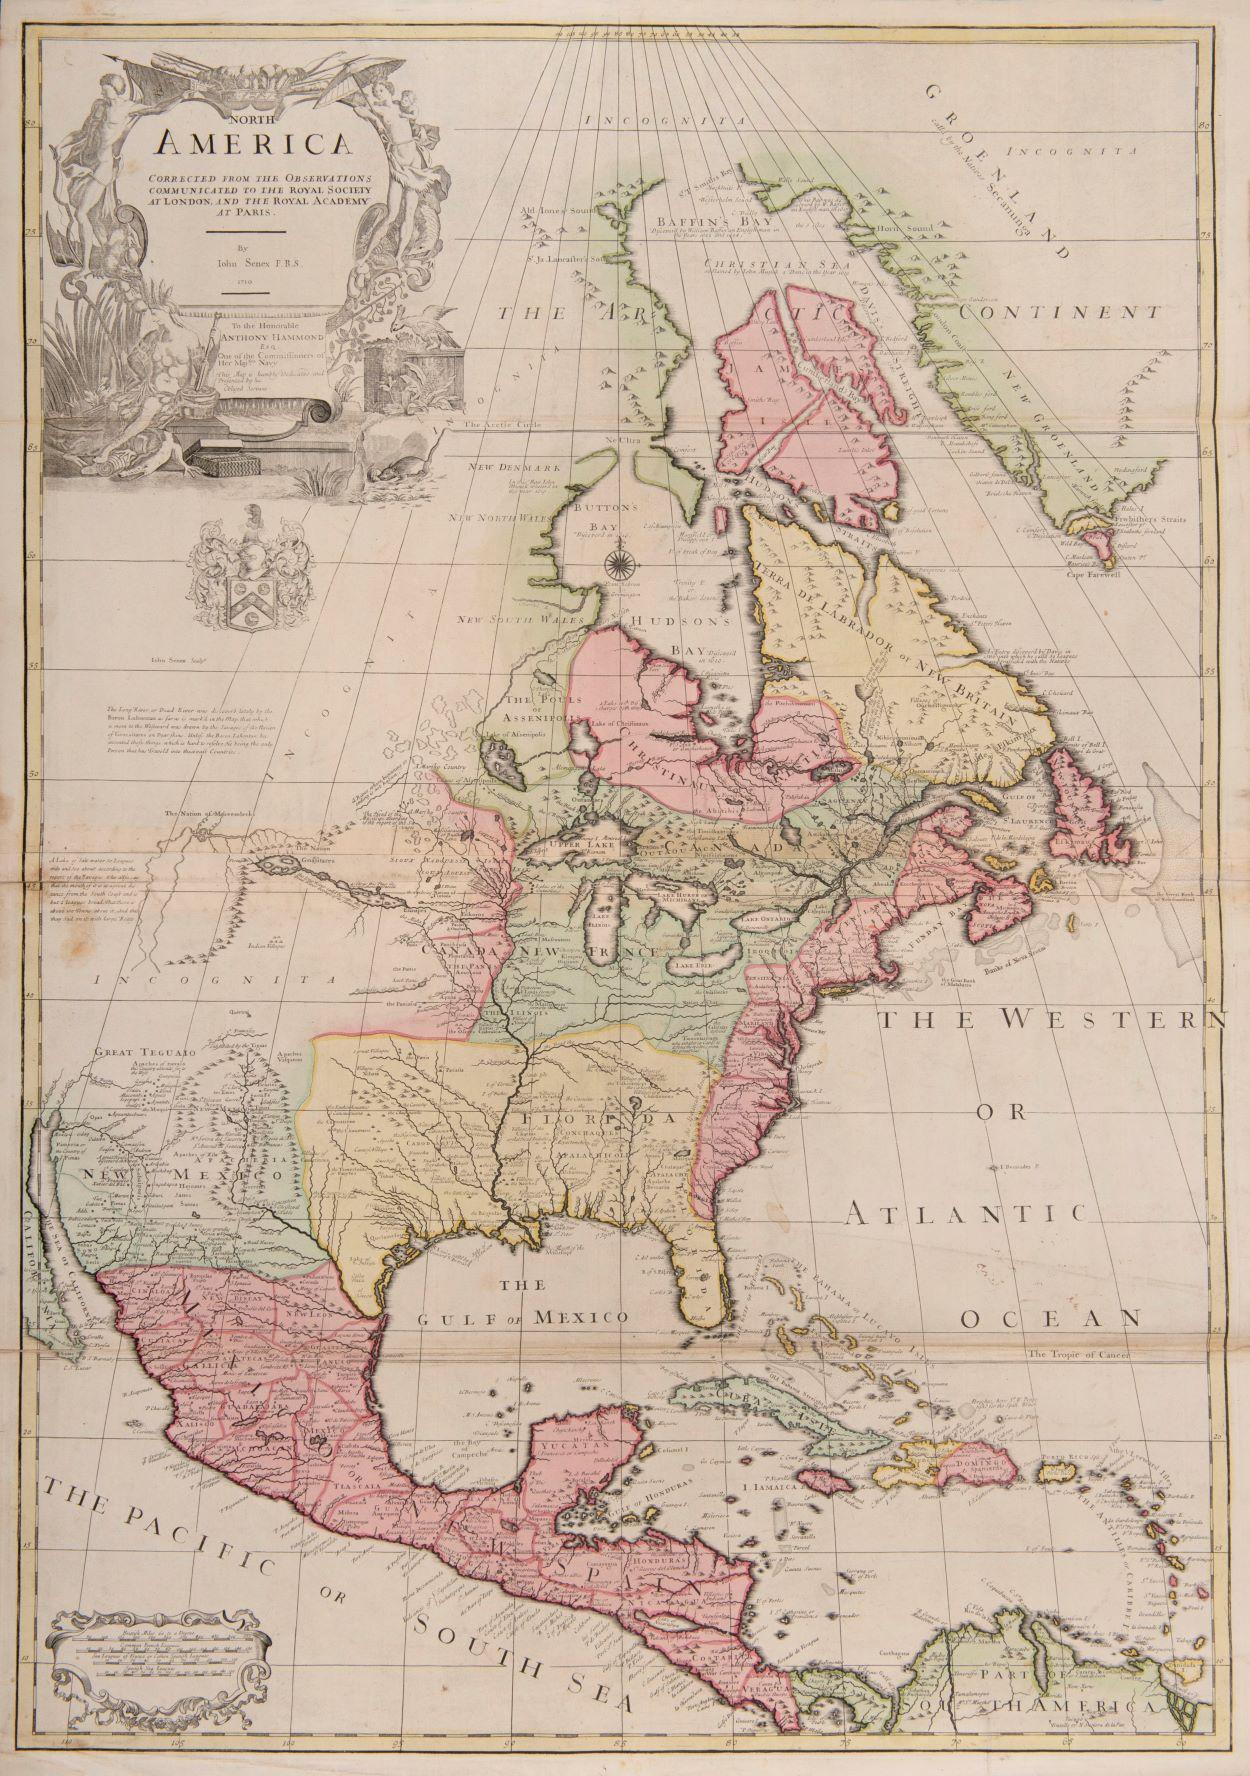 one of the earliest large-scale English maps of North America